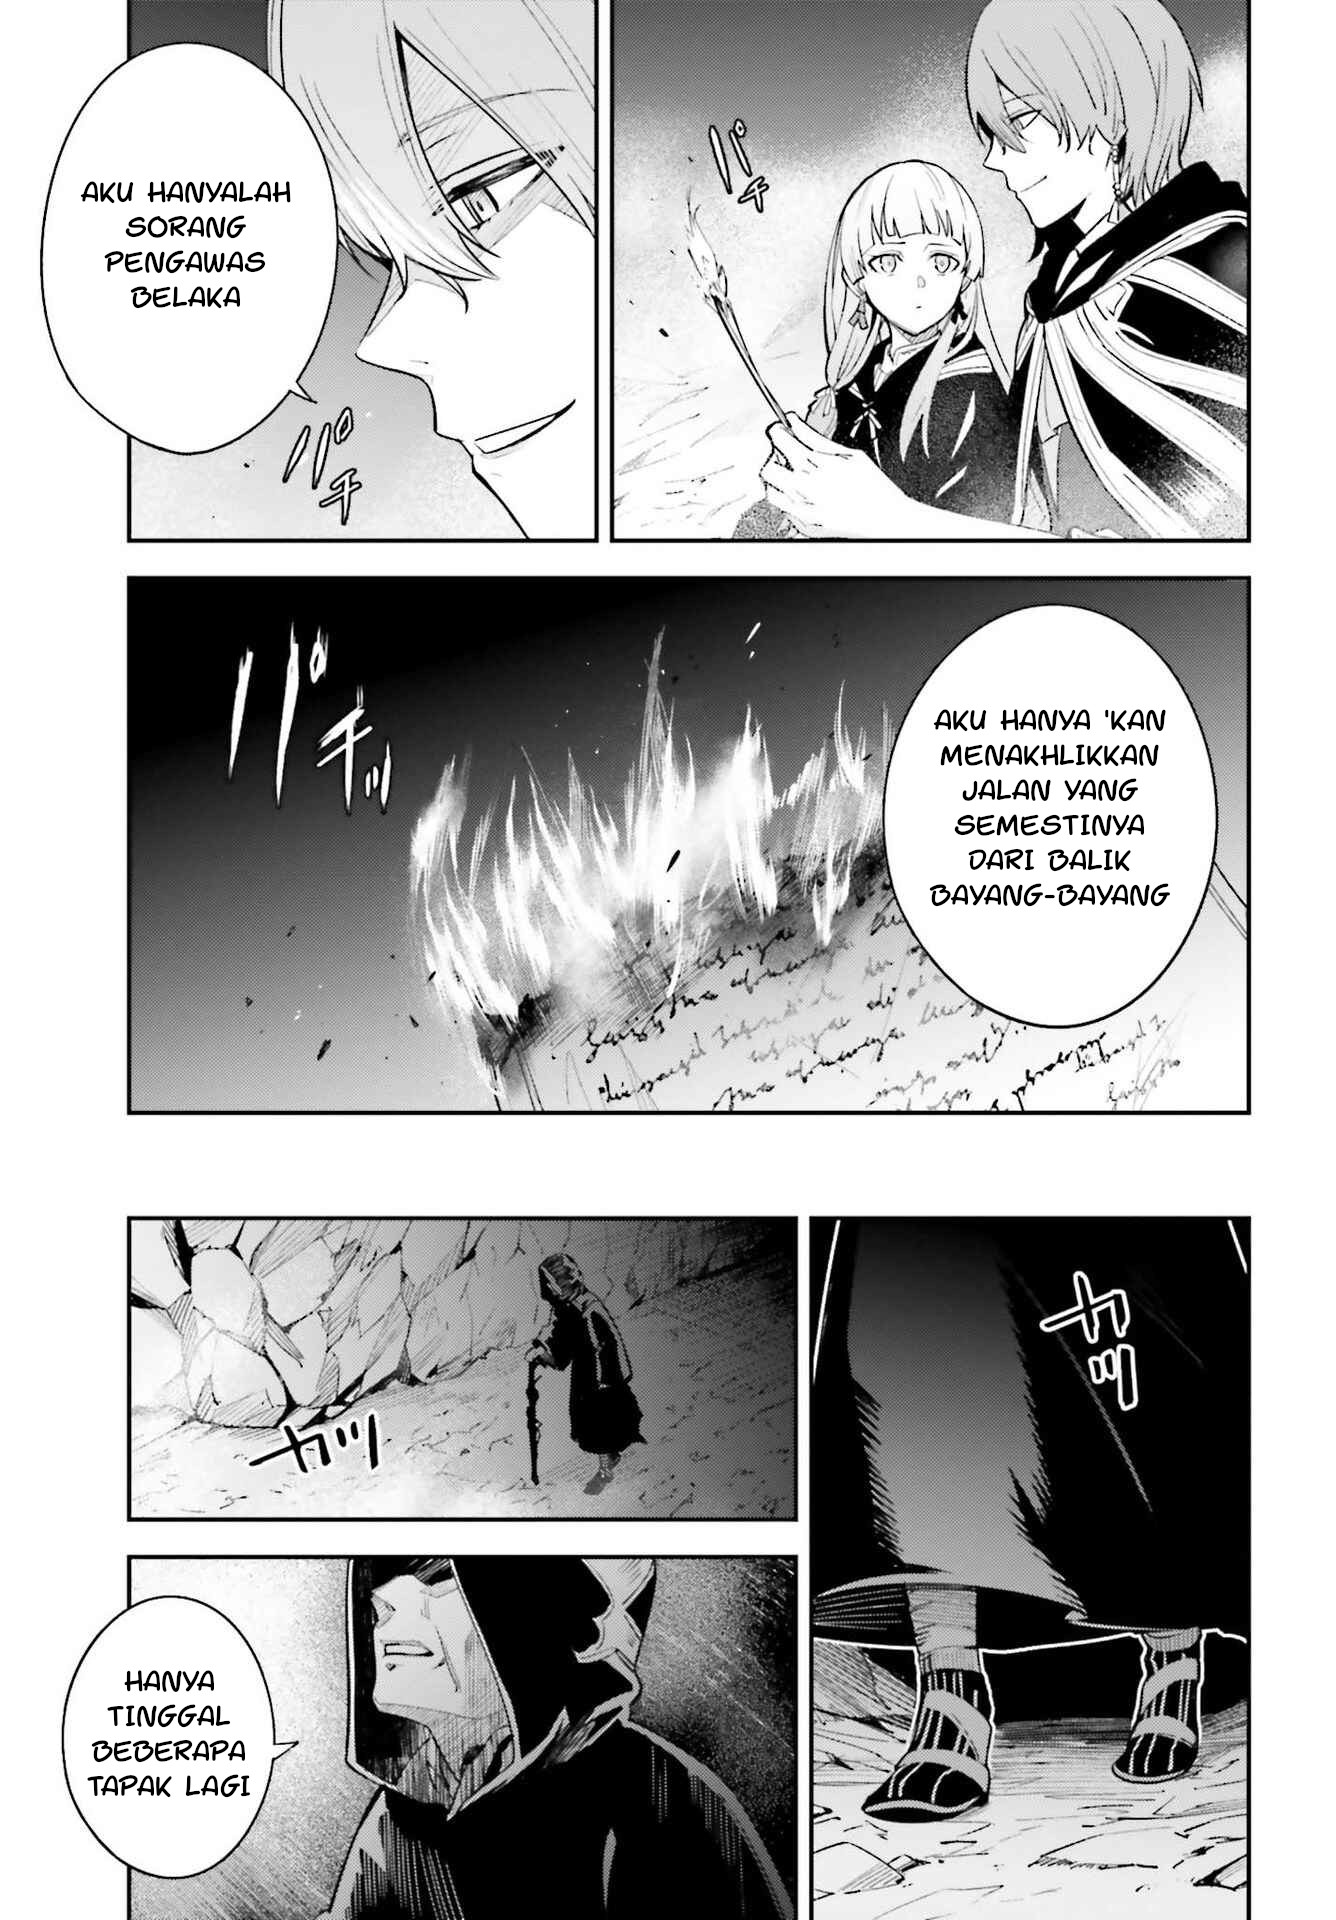 Unnamed Memory Chapter 5.5 Bahasa Indonesia